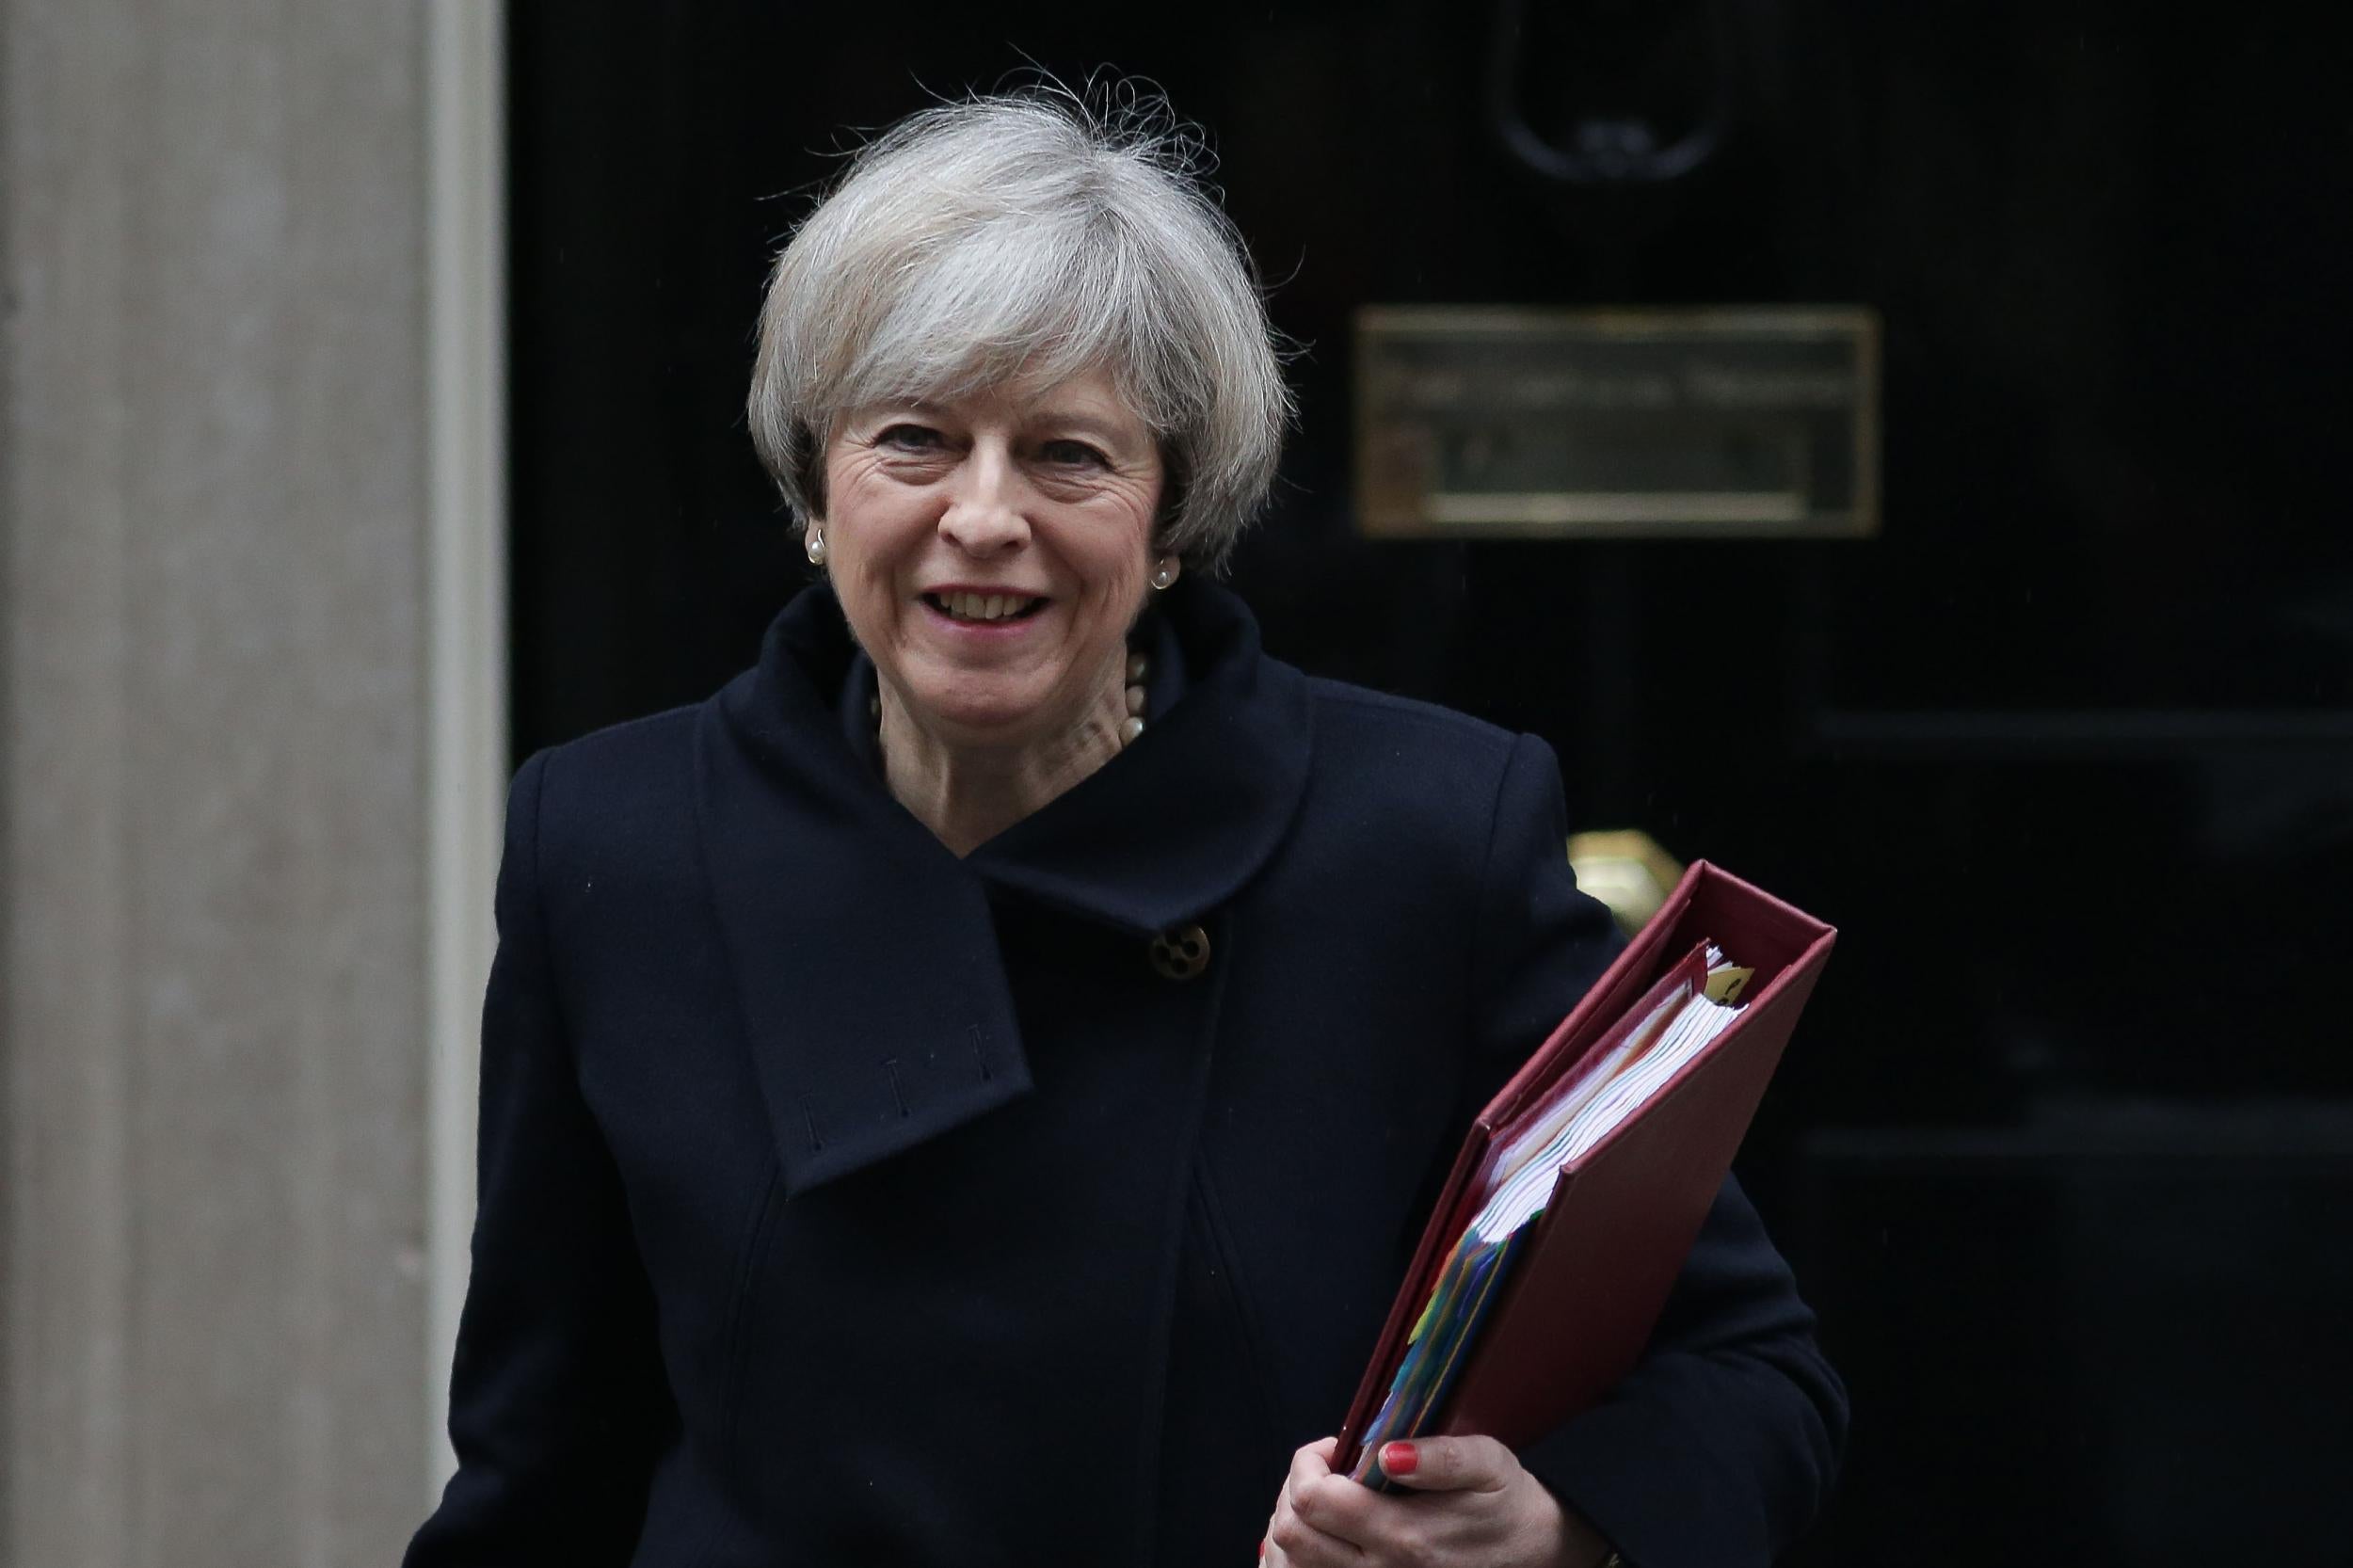 May is also expected to brief EU leaders on her meeting with President Donald Trump in Washington last week